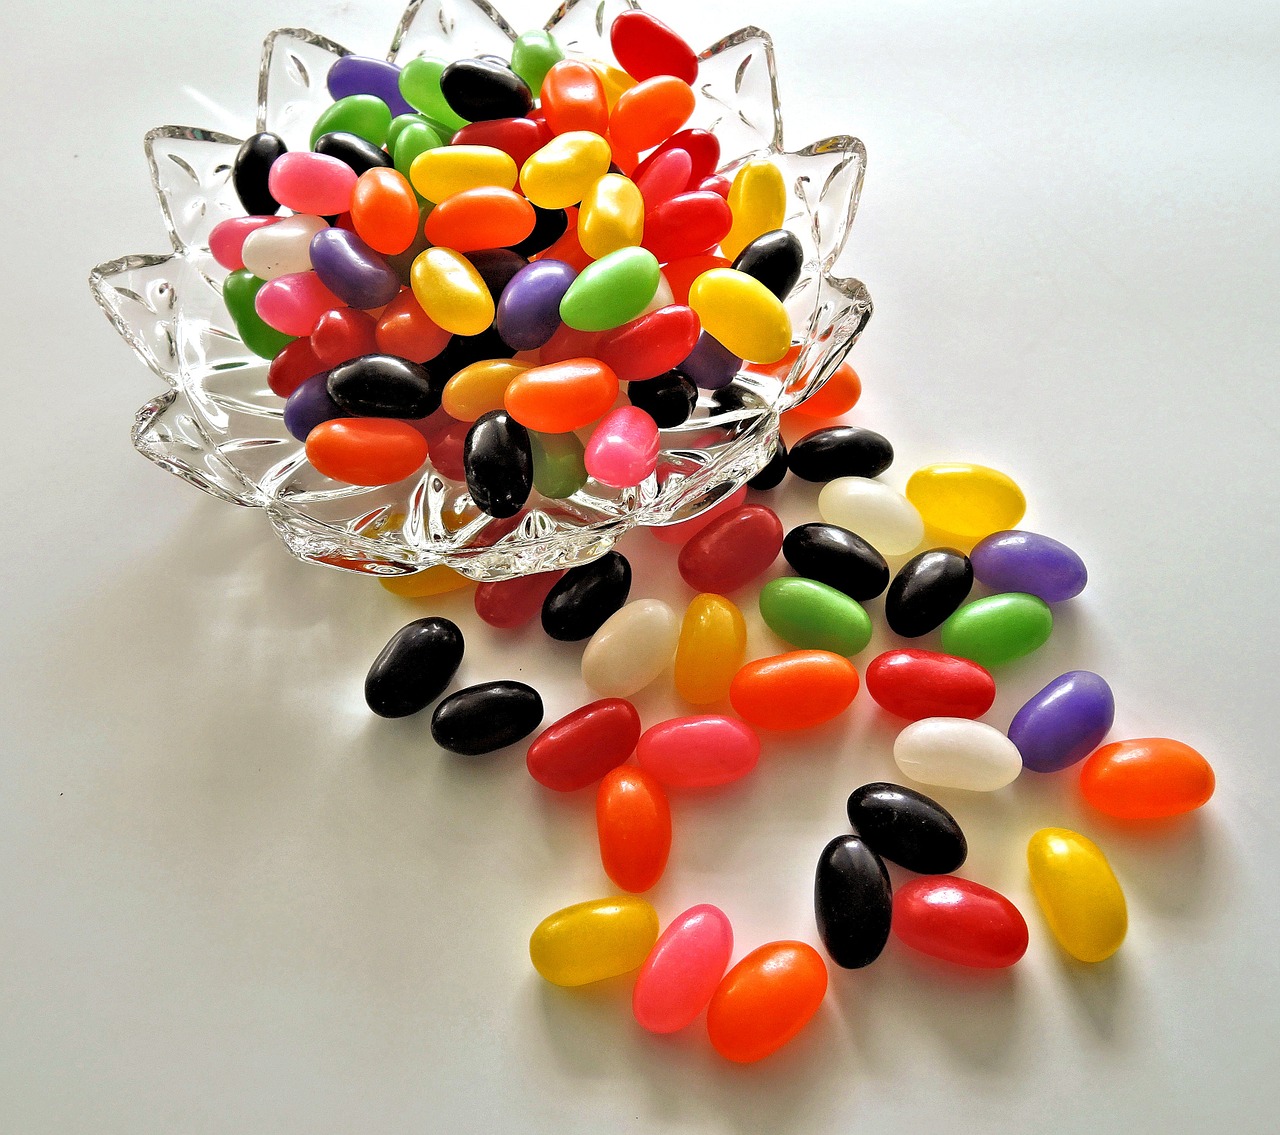 jelly beans candy confection free photo